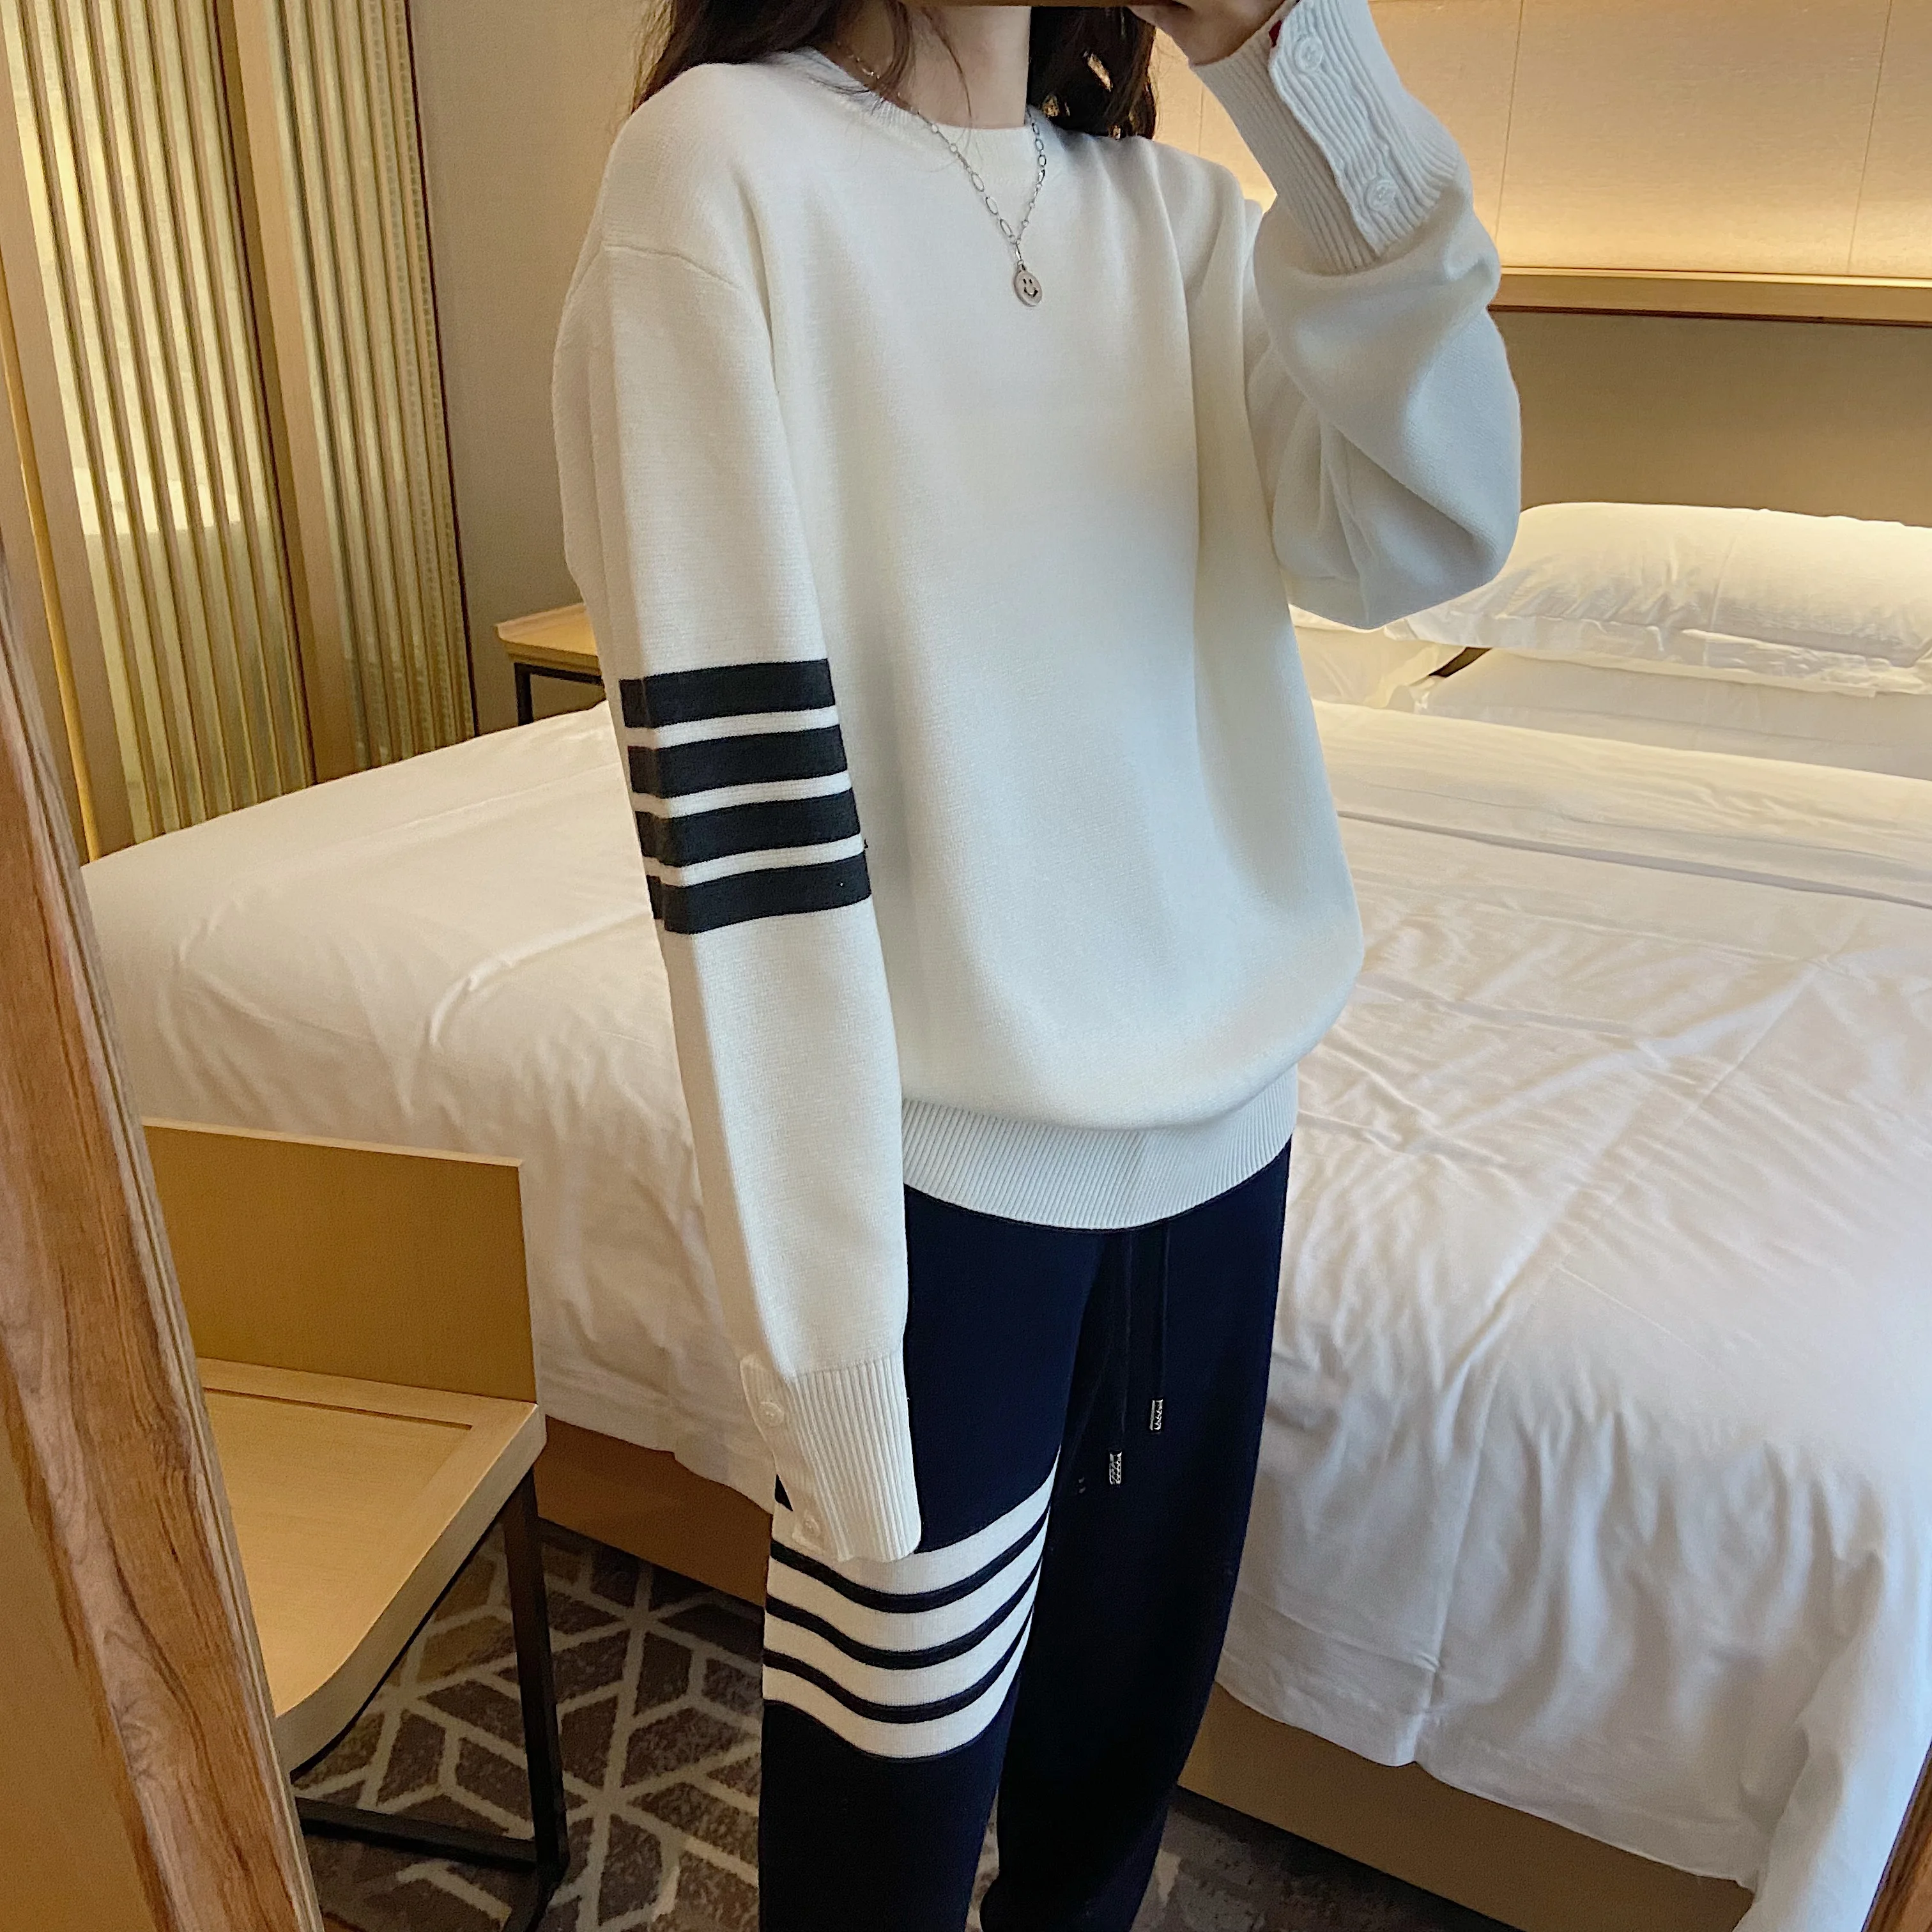 TB High Quality Fashionable Women's Four Stripe Loose Skinny Sweater Bottomed with Wool Sweater Round Neck Pullover